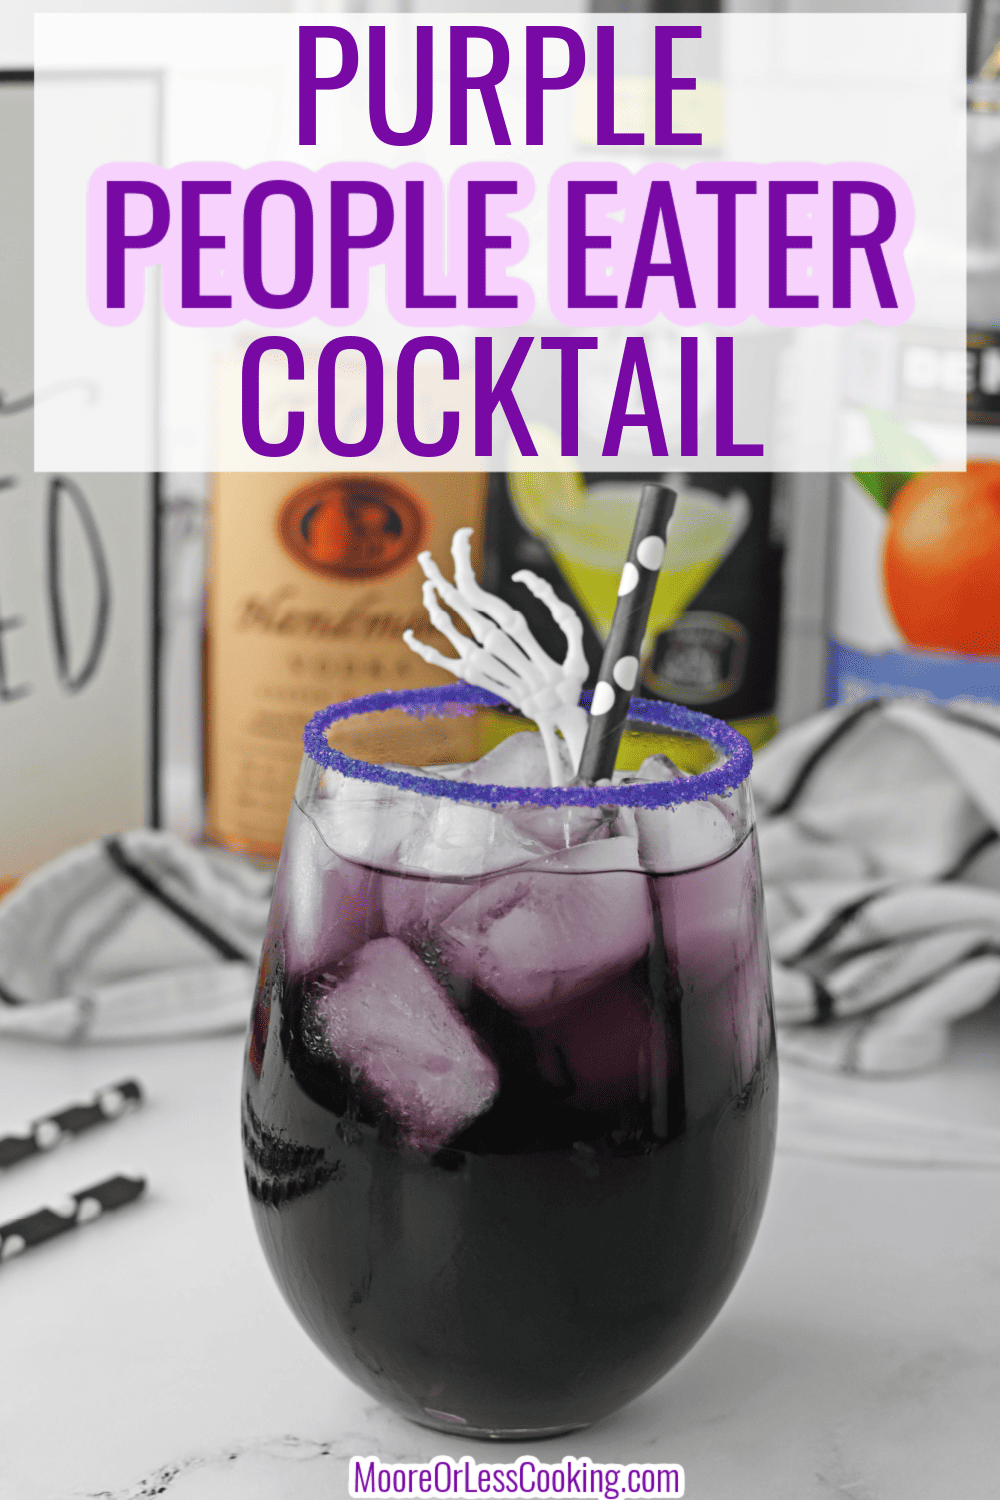 When you're looking for a fun, colorful and boozy Halloween drink to serve, you'll want to make this spooky Purple People Eater Cocktail. It's super simple to make and you can make it even more festive by rimming the cocktail glass with purple sanding sugar and adding creepy garnishes, too! via @Mooreorlesscook